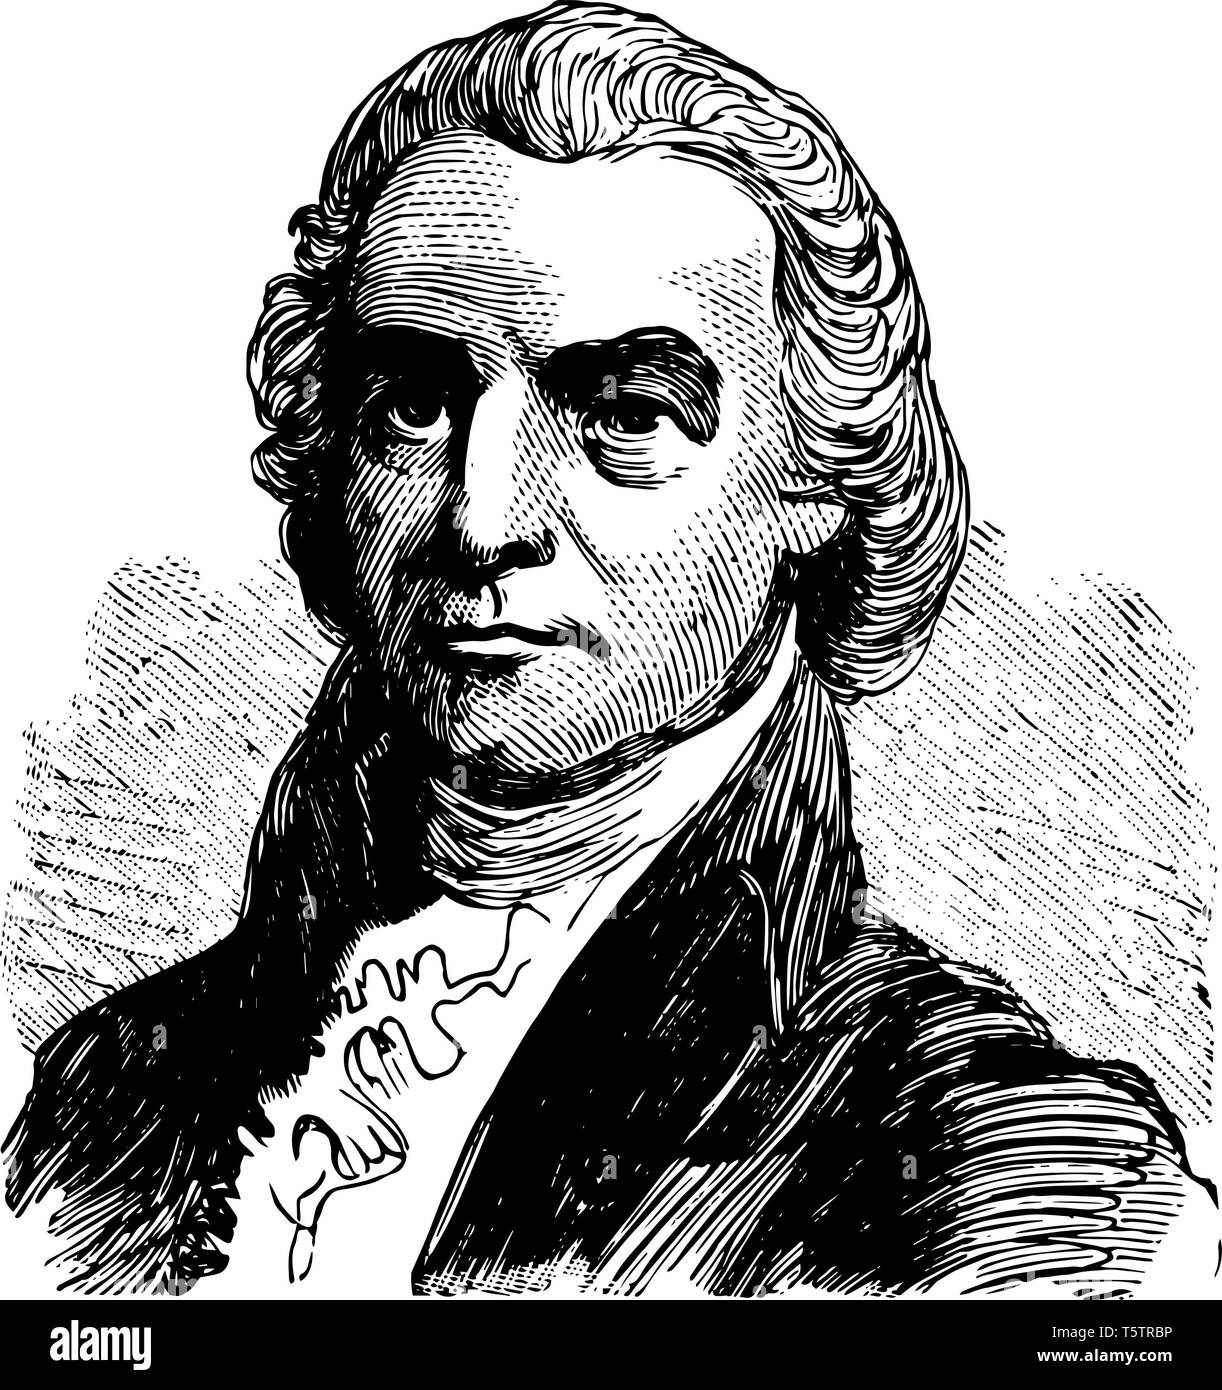 Oliver Ellsworth 1745 to 1807 he was an American lawyer judge politician diplomat drafter of the United States constitution U.S. senator from Connecti Stock Vector